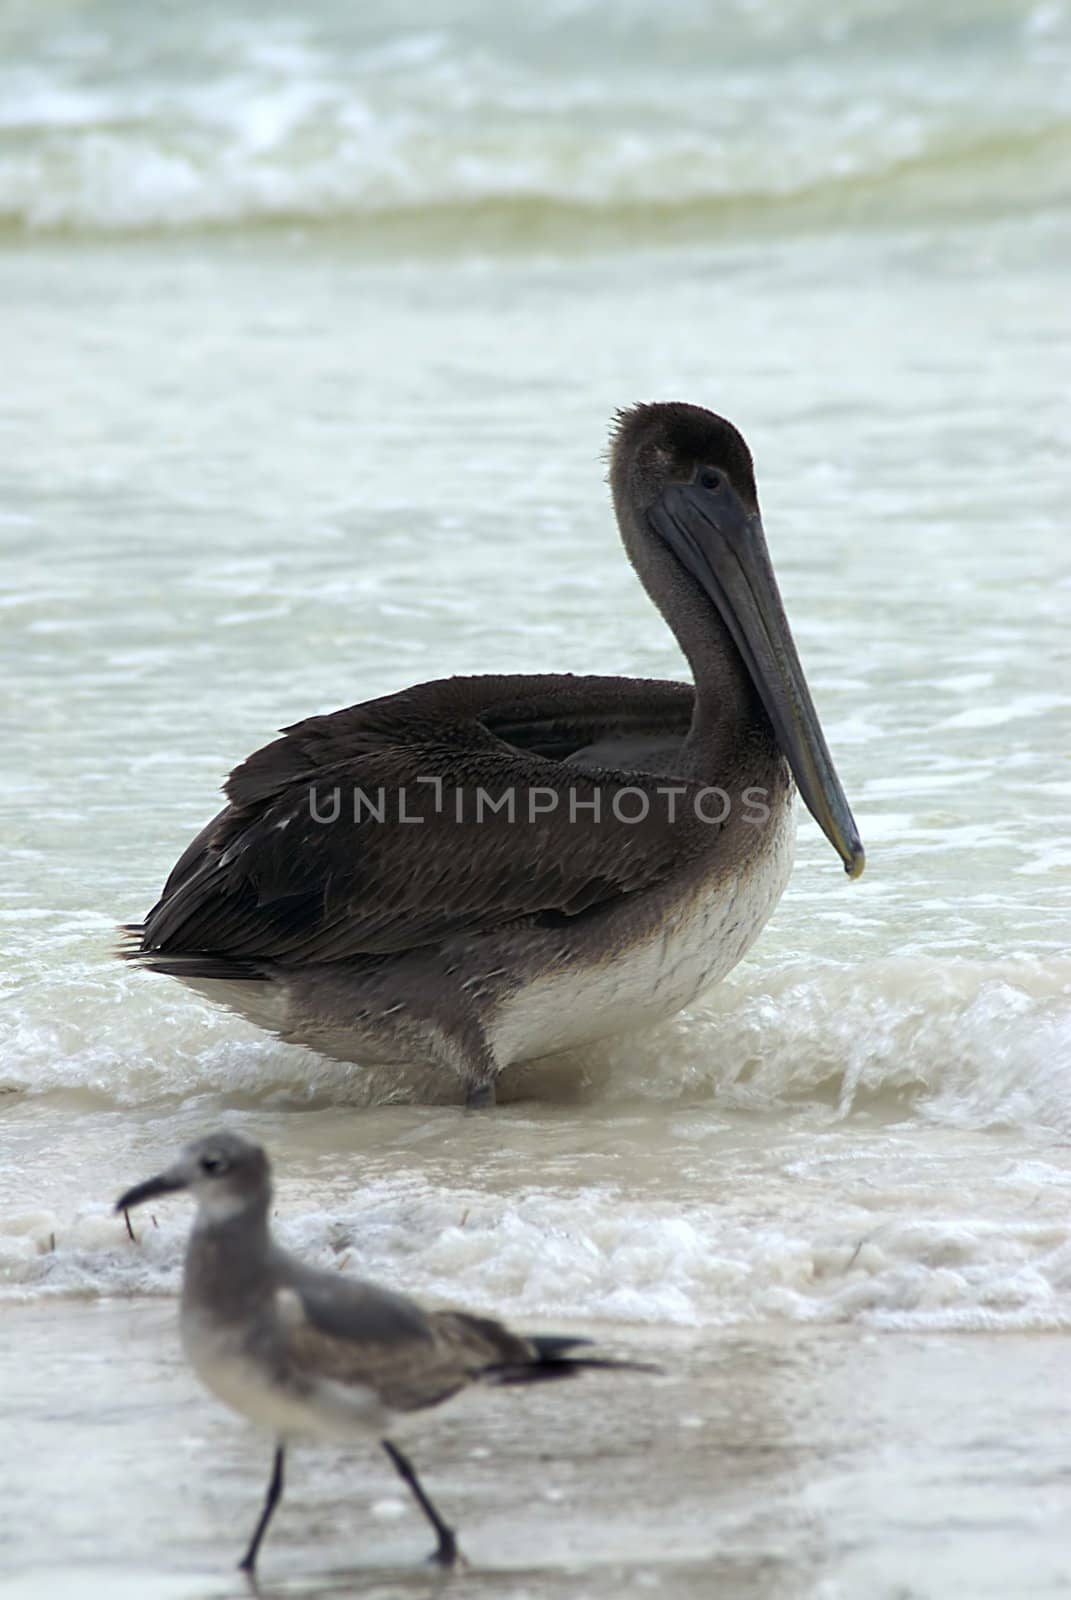 A Pelican and Sandpiper enjoy lounging in the surf on a tropical beach